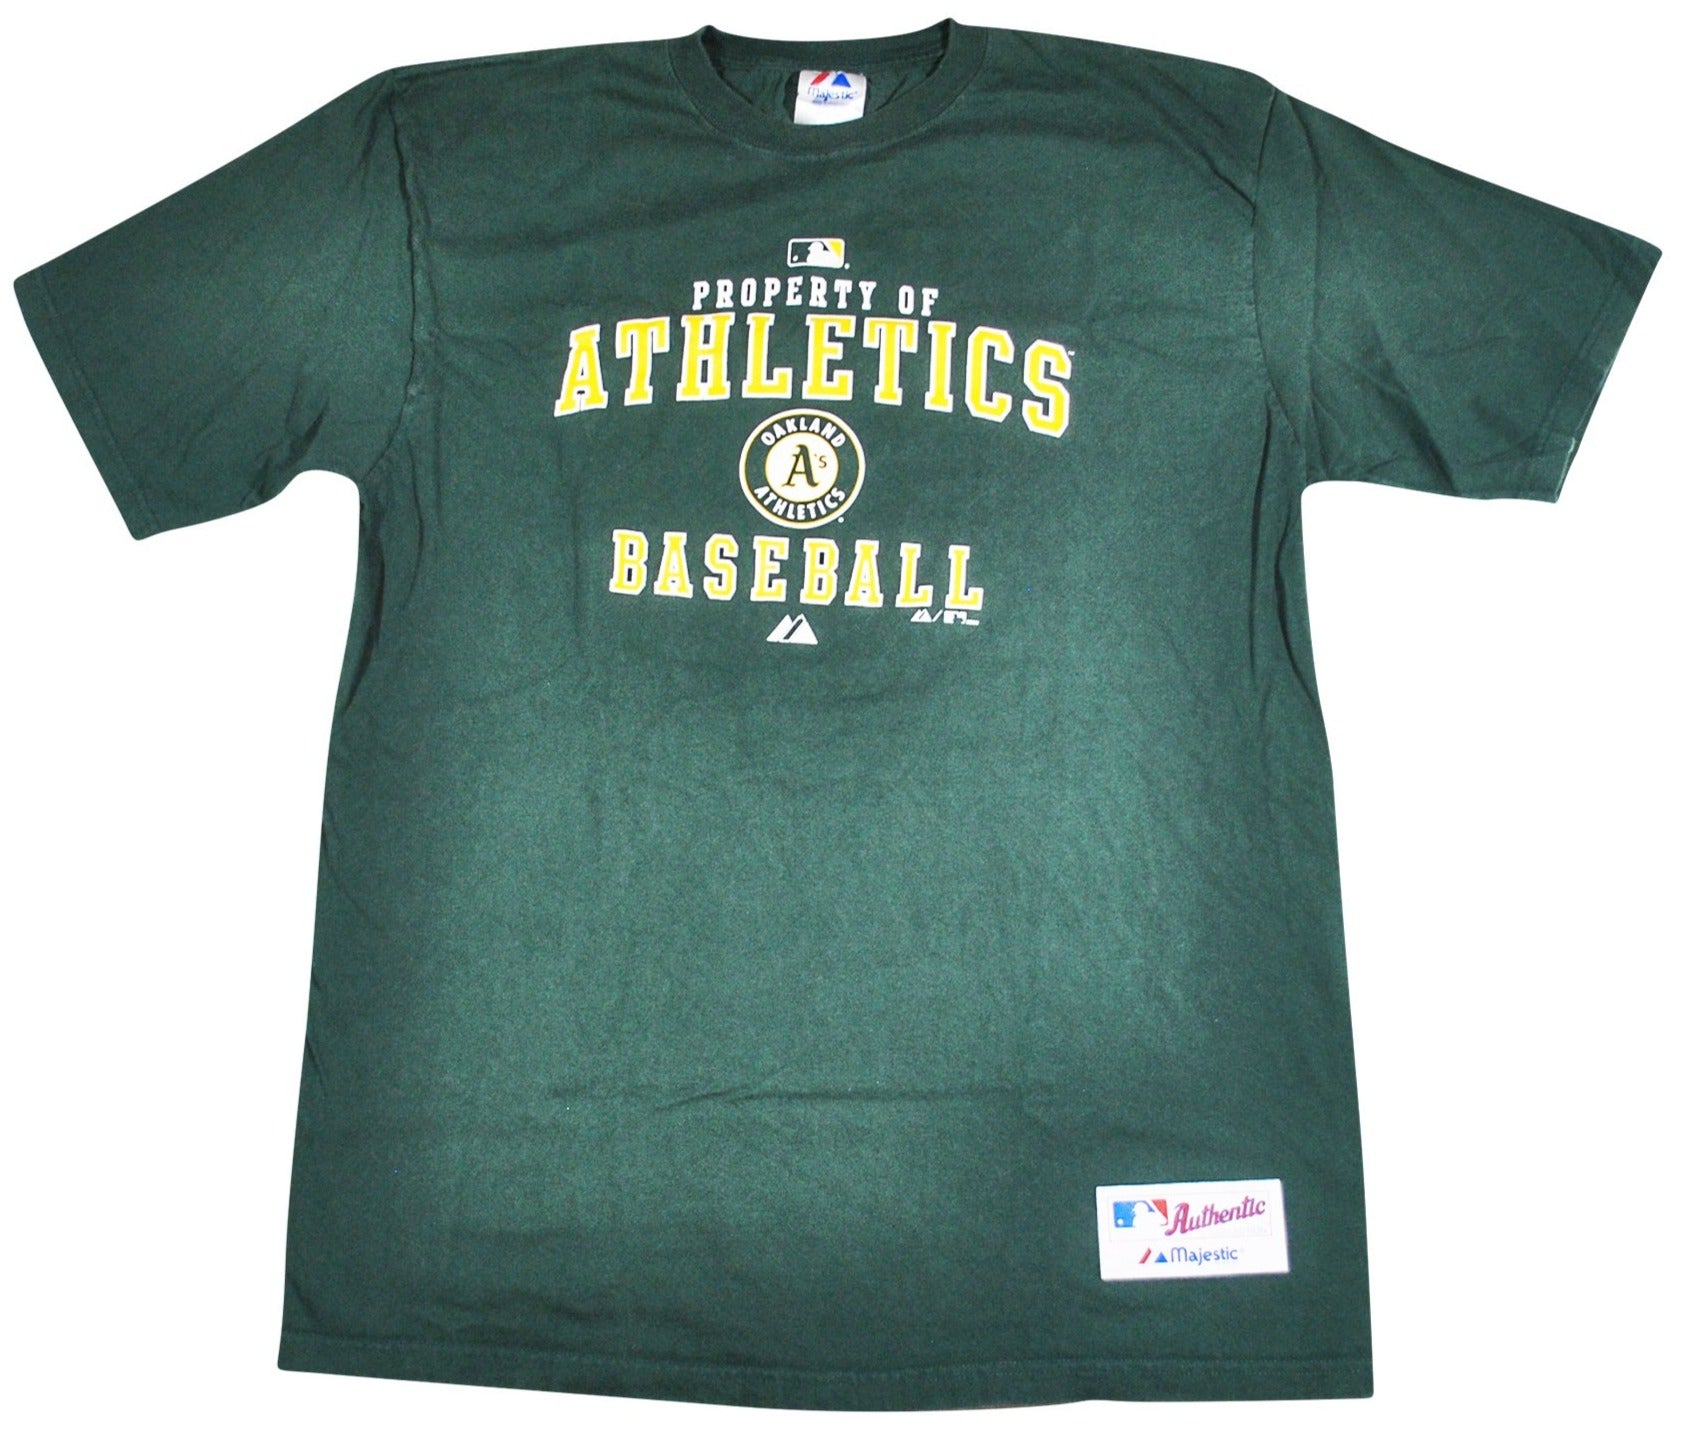 Oakland Athletics Vintage Shirt Jersey Vtg 90’s Made in USA Size XL Tee